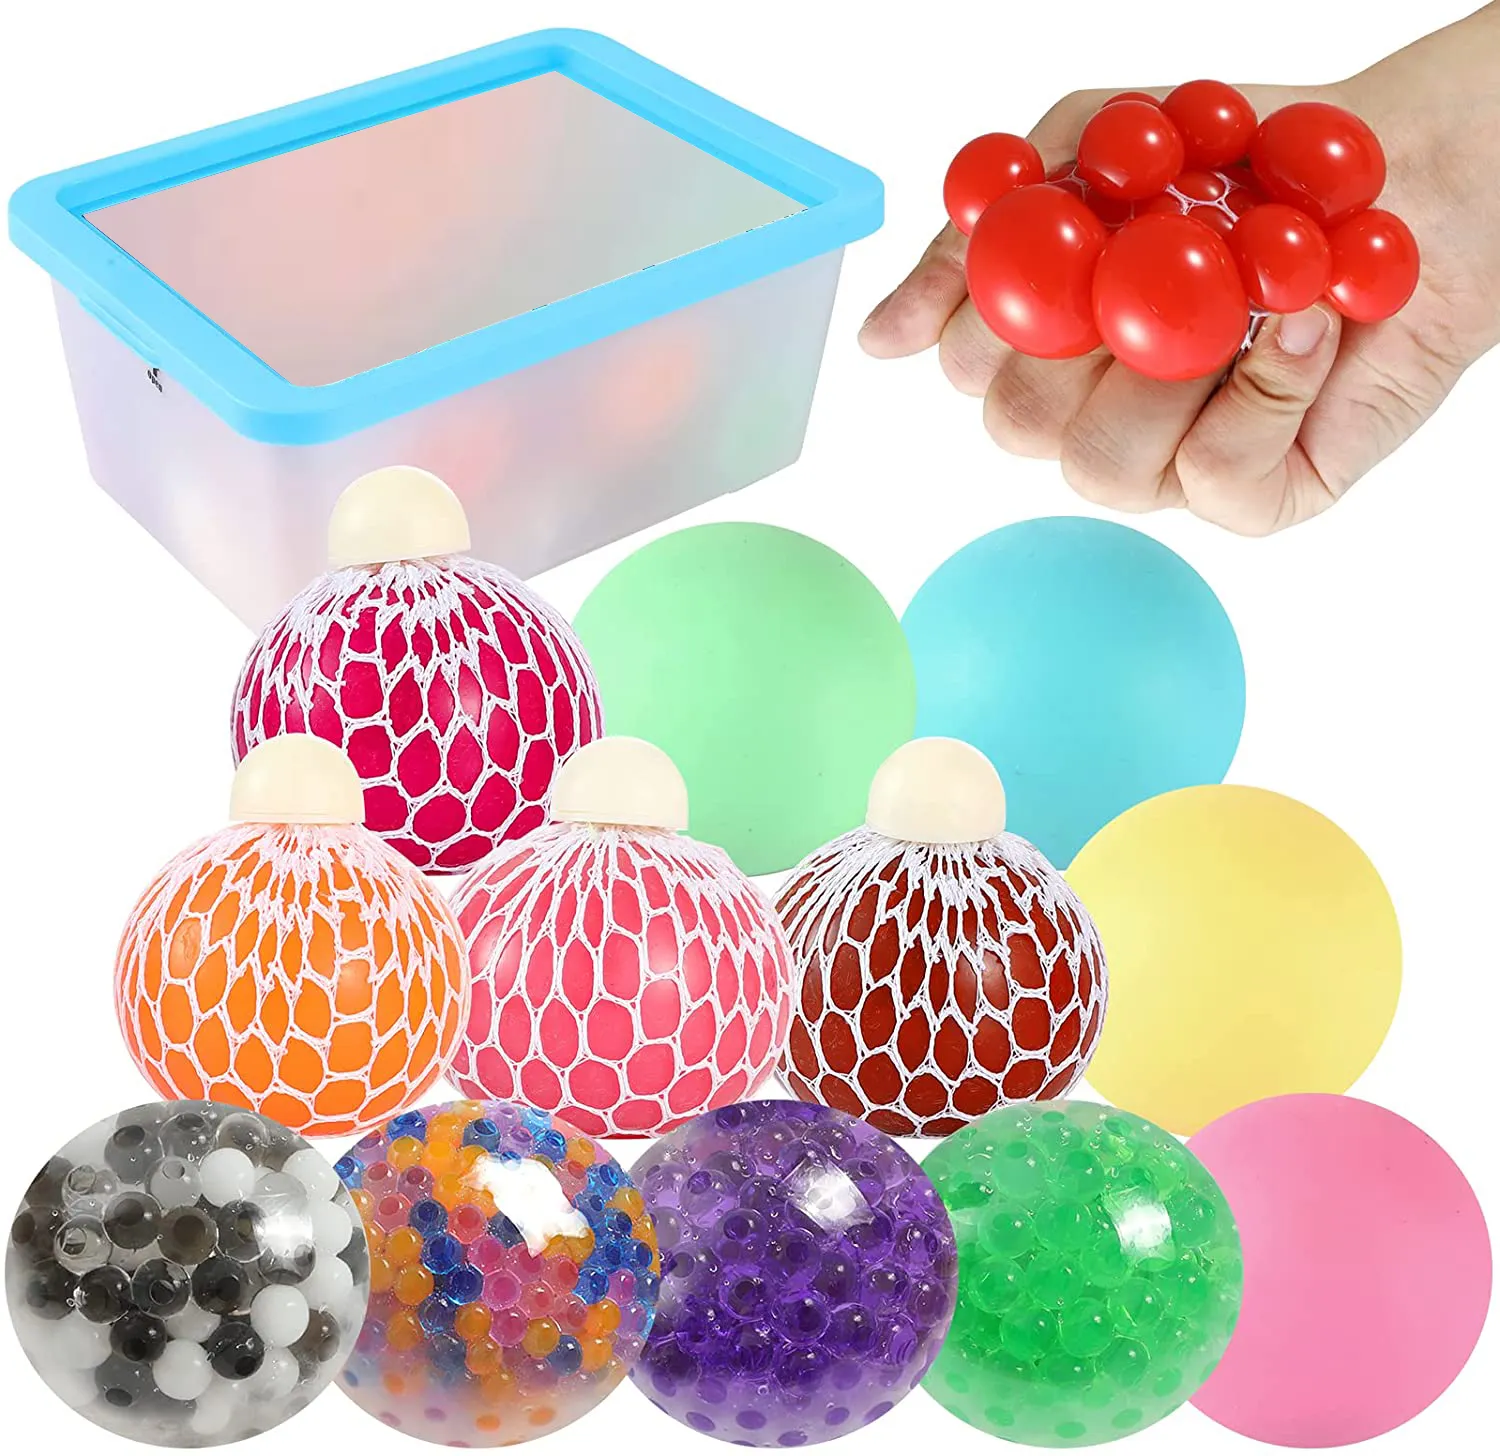 Amazon Hot Selling Custom 12 Pack Squeeze Mesh Stress Relief Squishy Ball Sensory Stress Balls Fidget Toys for Kids